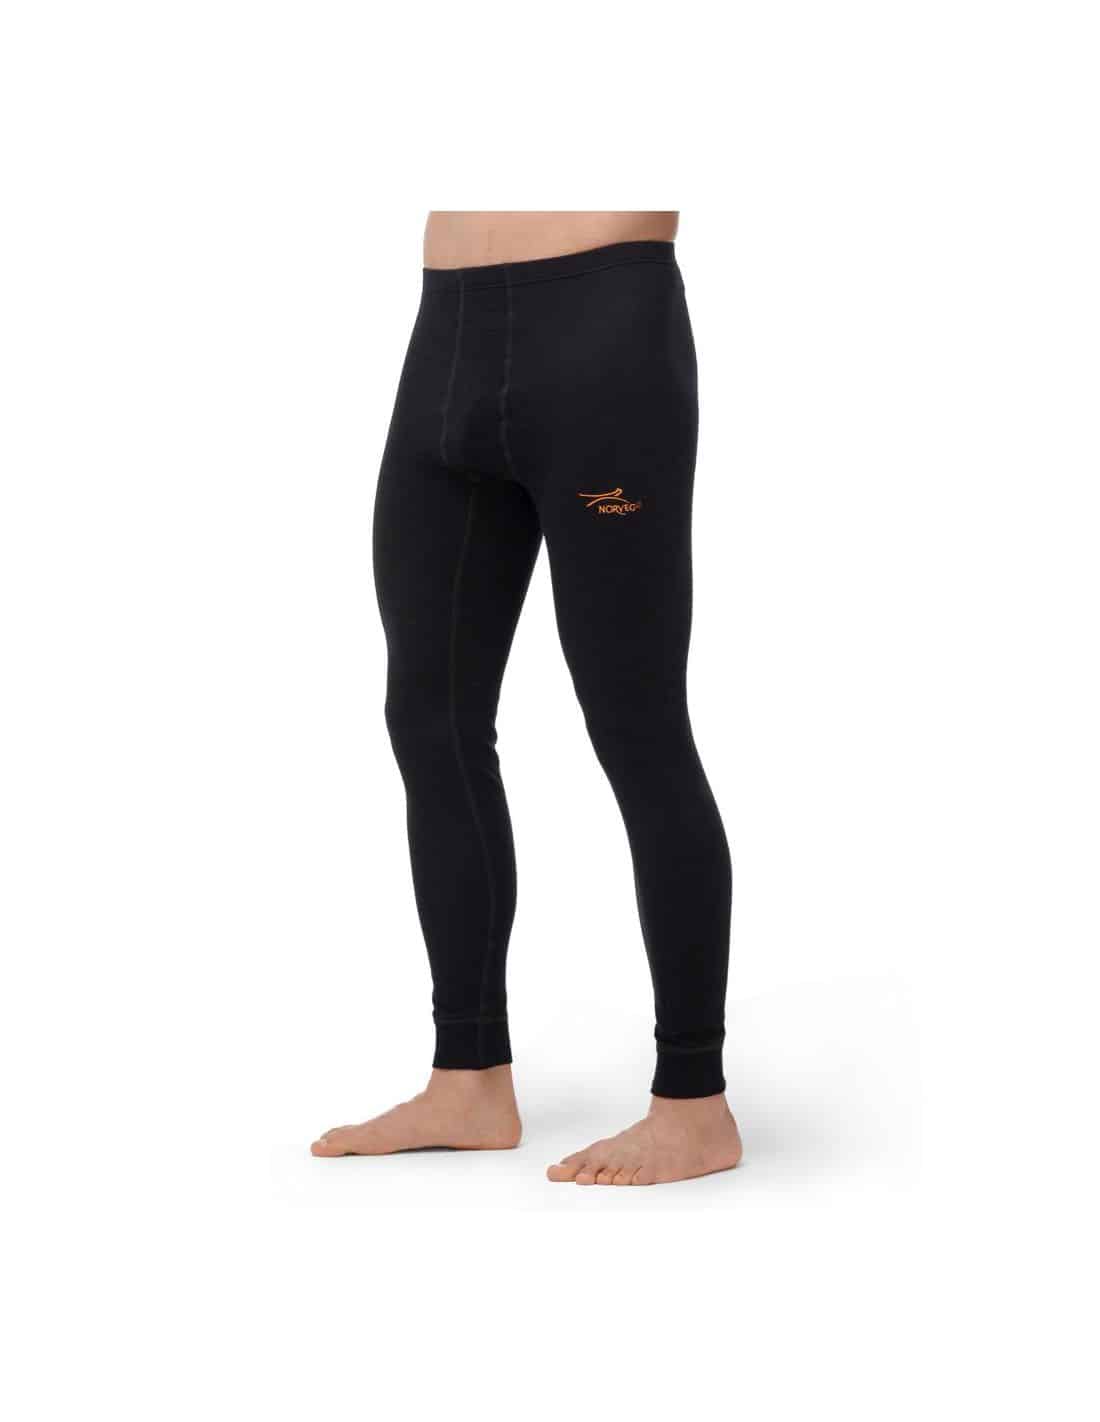 Men's extreme cold thermal underwear, -30°C protection